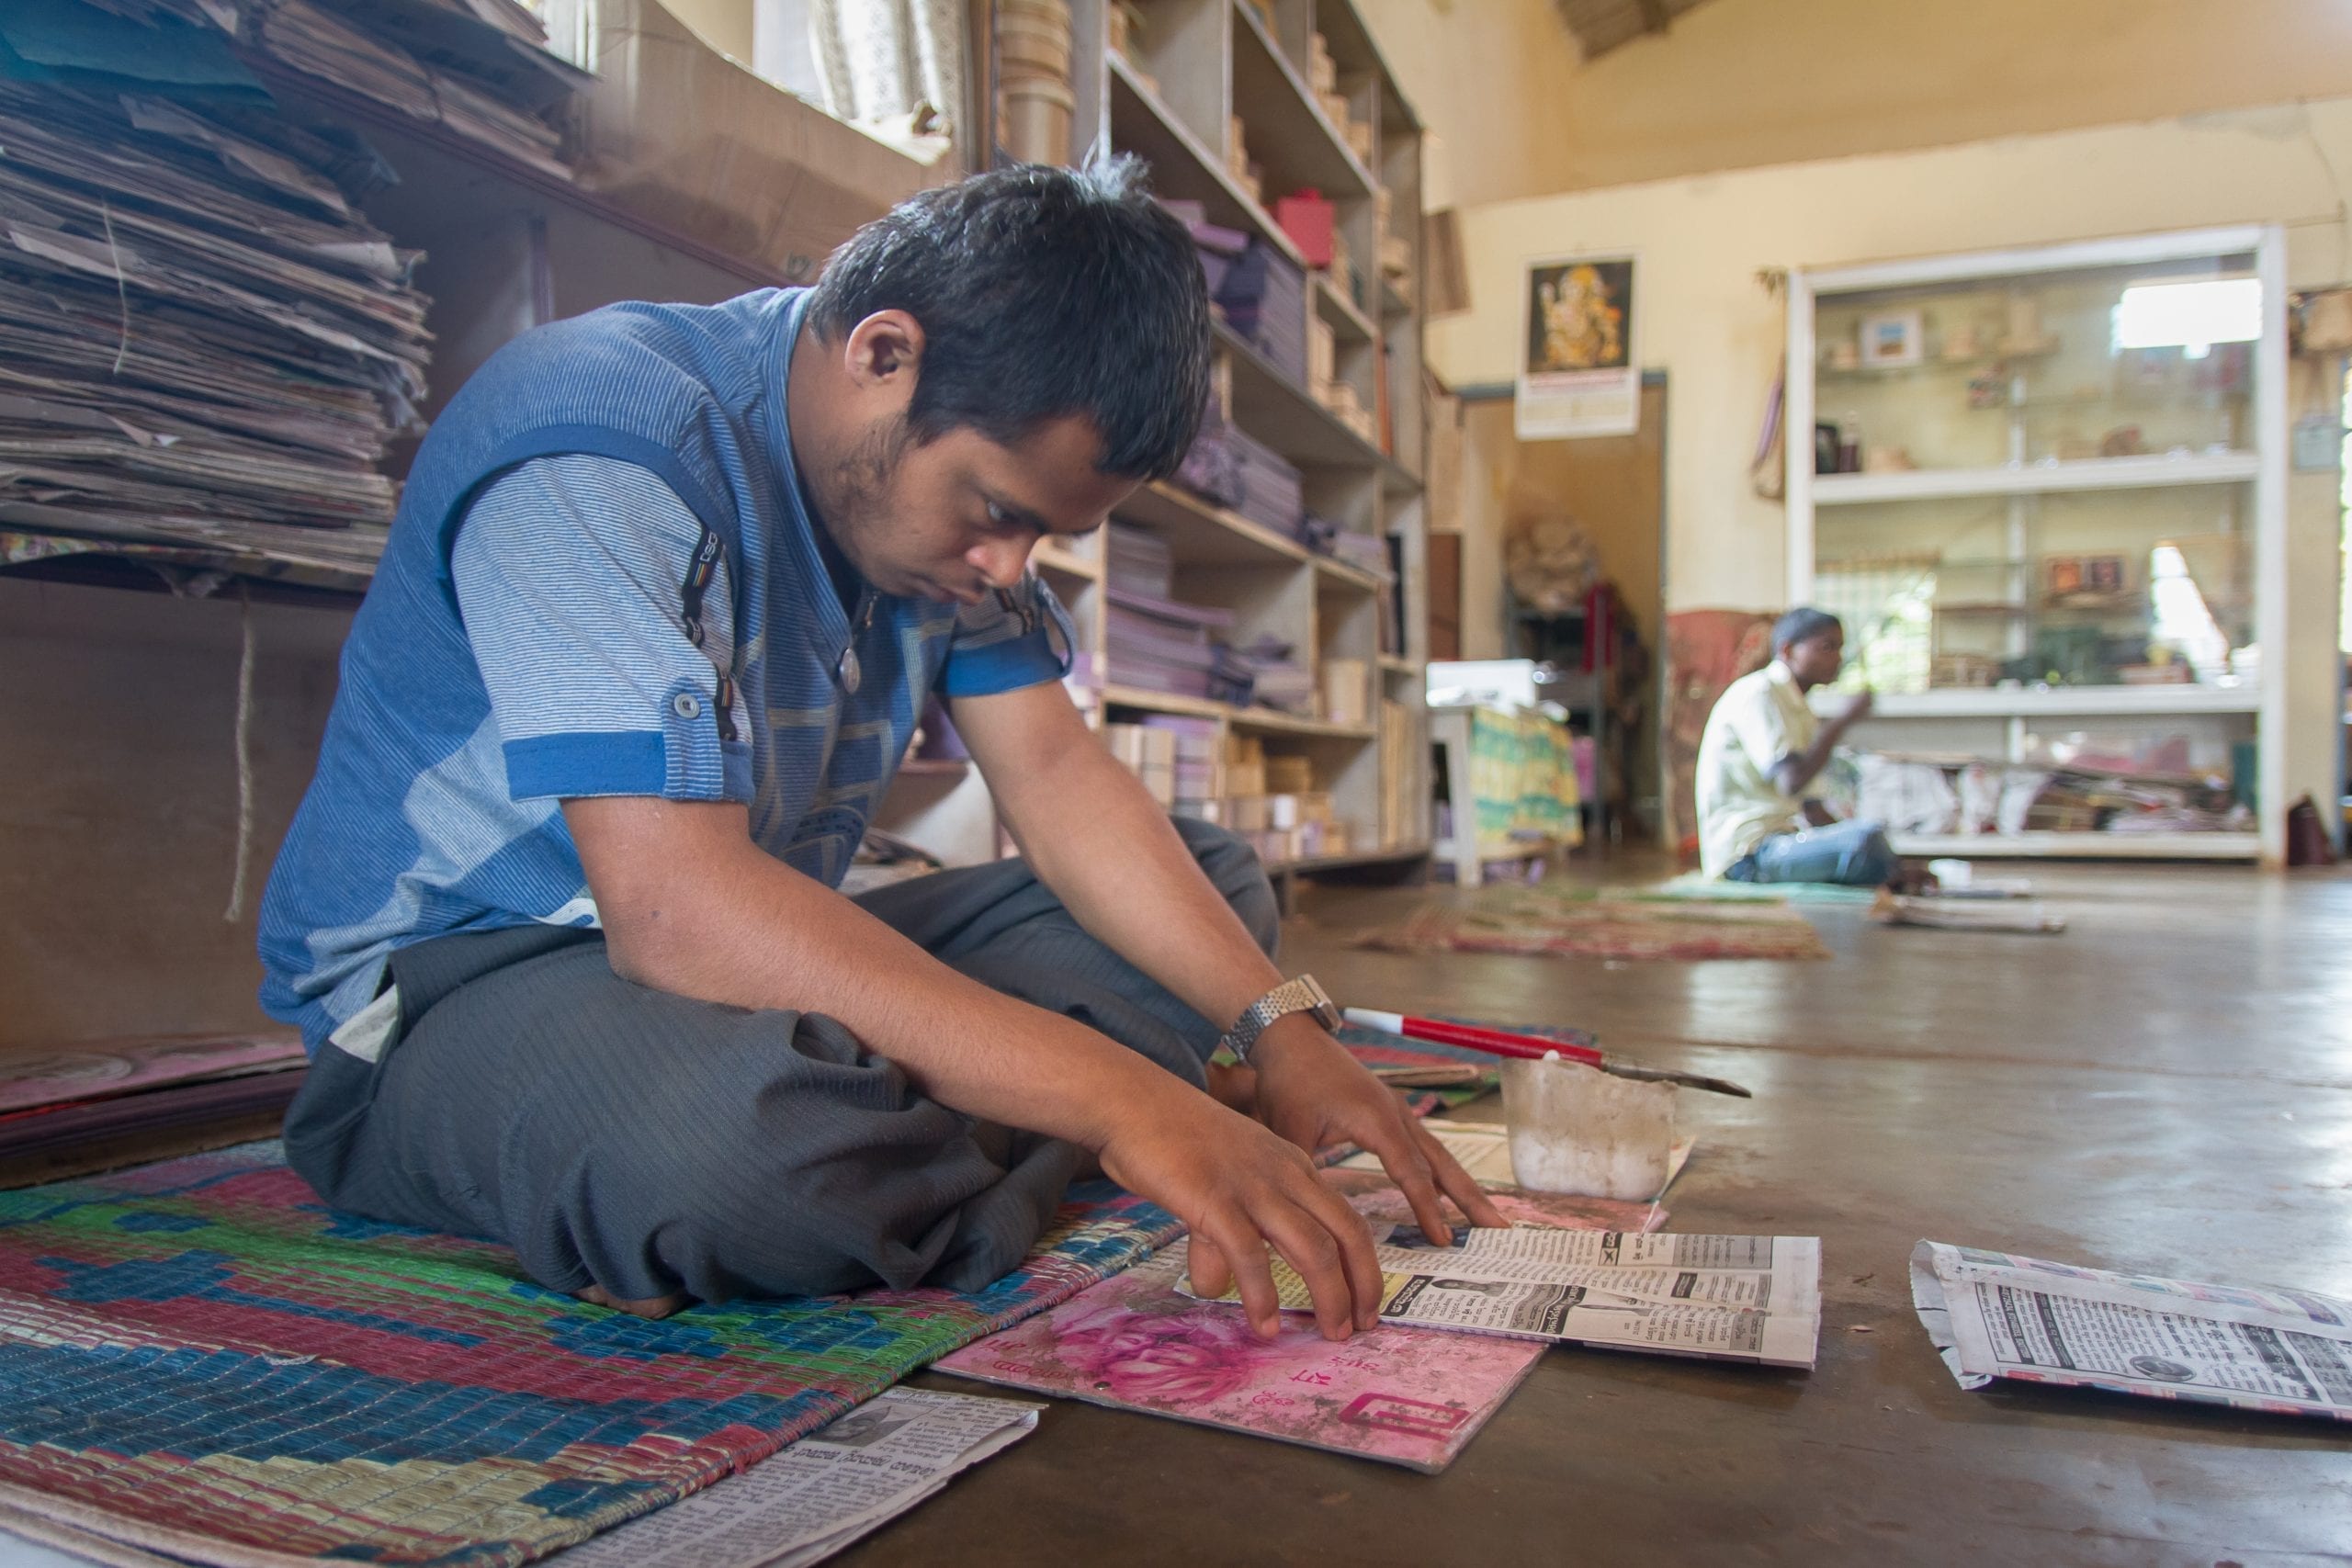 Chetana, a TechnoServe business plan competition winner in southern India, is a thriving business creating meaningful economic opportunities for disabled people in the community.